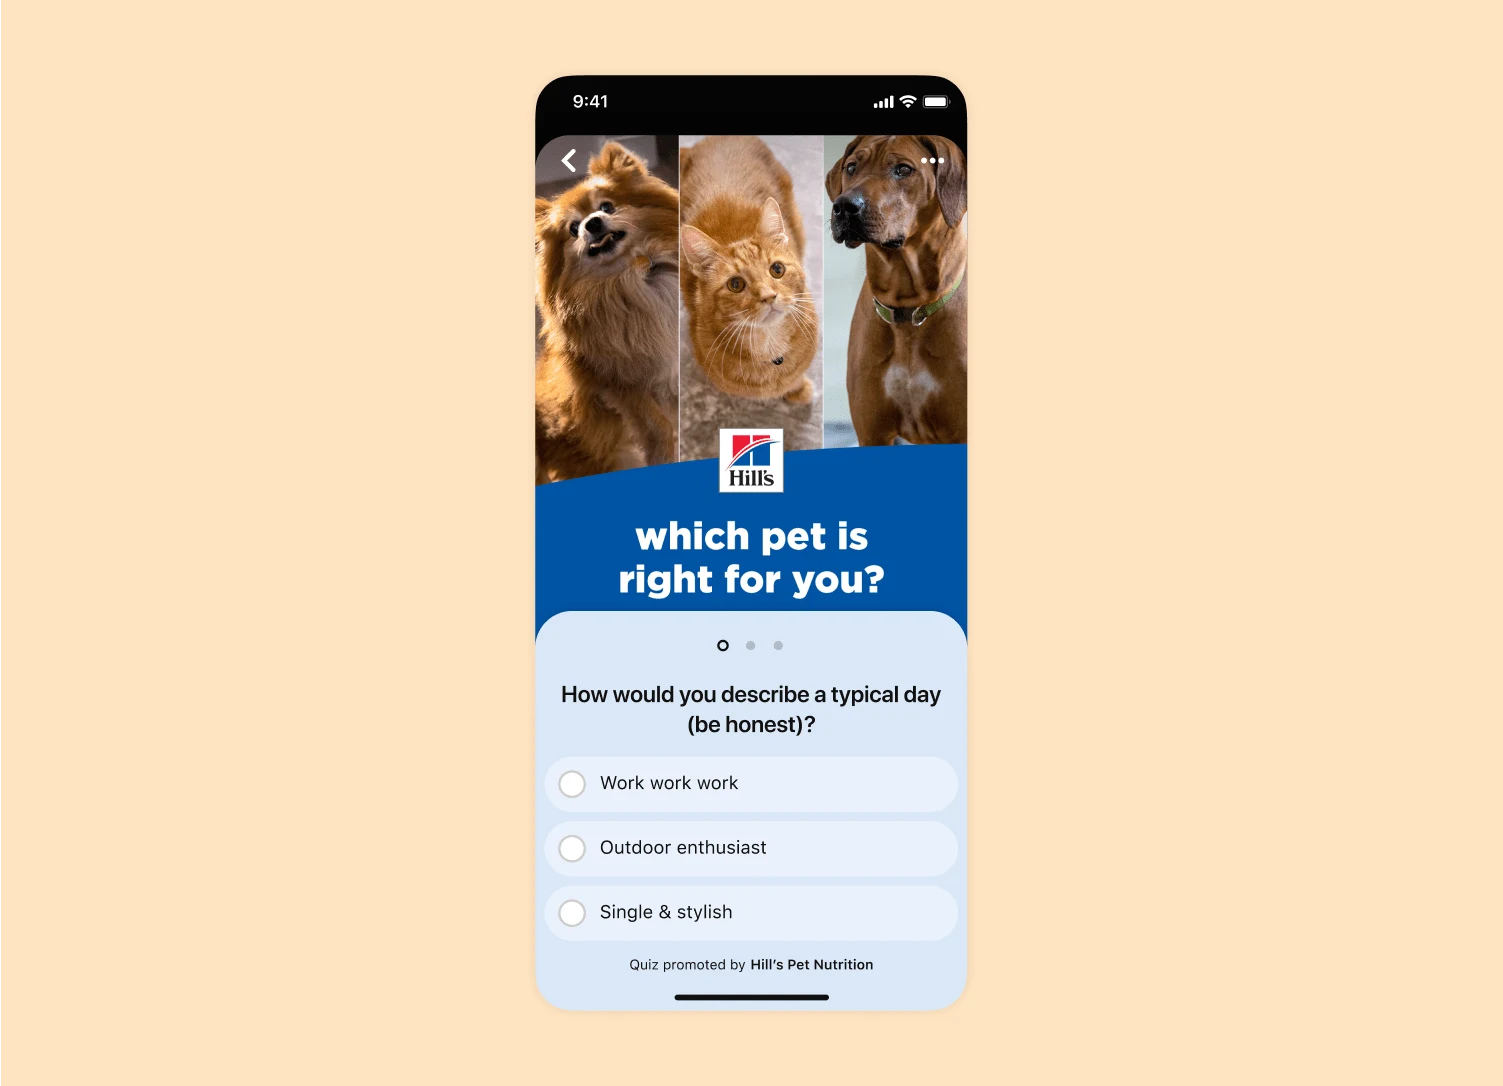 Mobile screen view of a Pinterest Quiz ad for the Hill's Nutrition pet food brand.